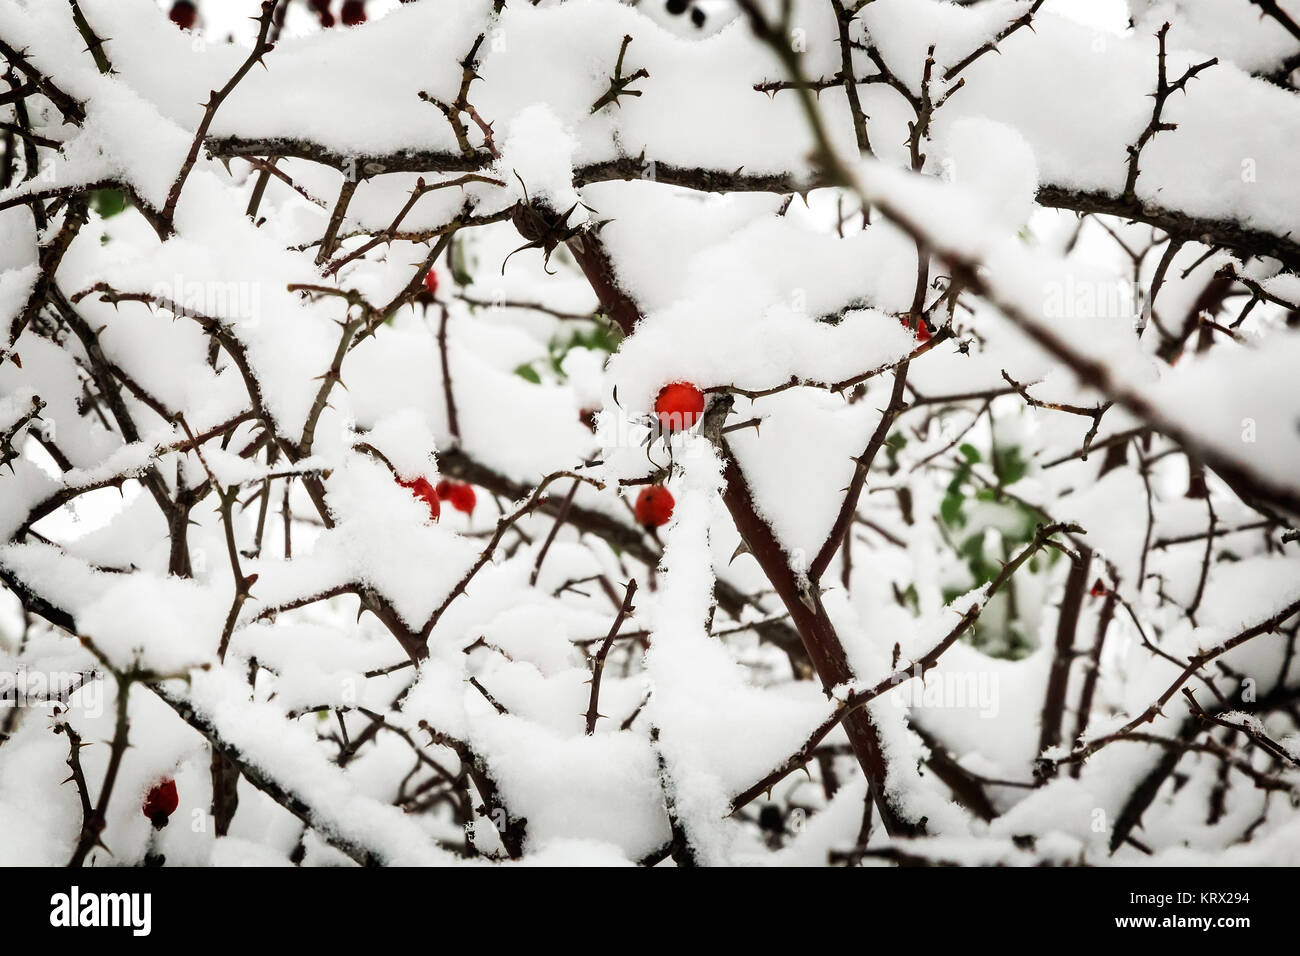 On the branches of the bushes of hawthorn berries hang ripe red berries, covered with first snow fell. Stock Photo